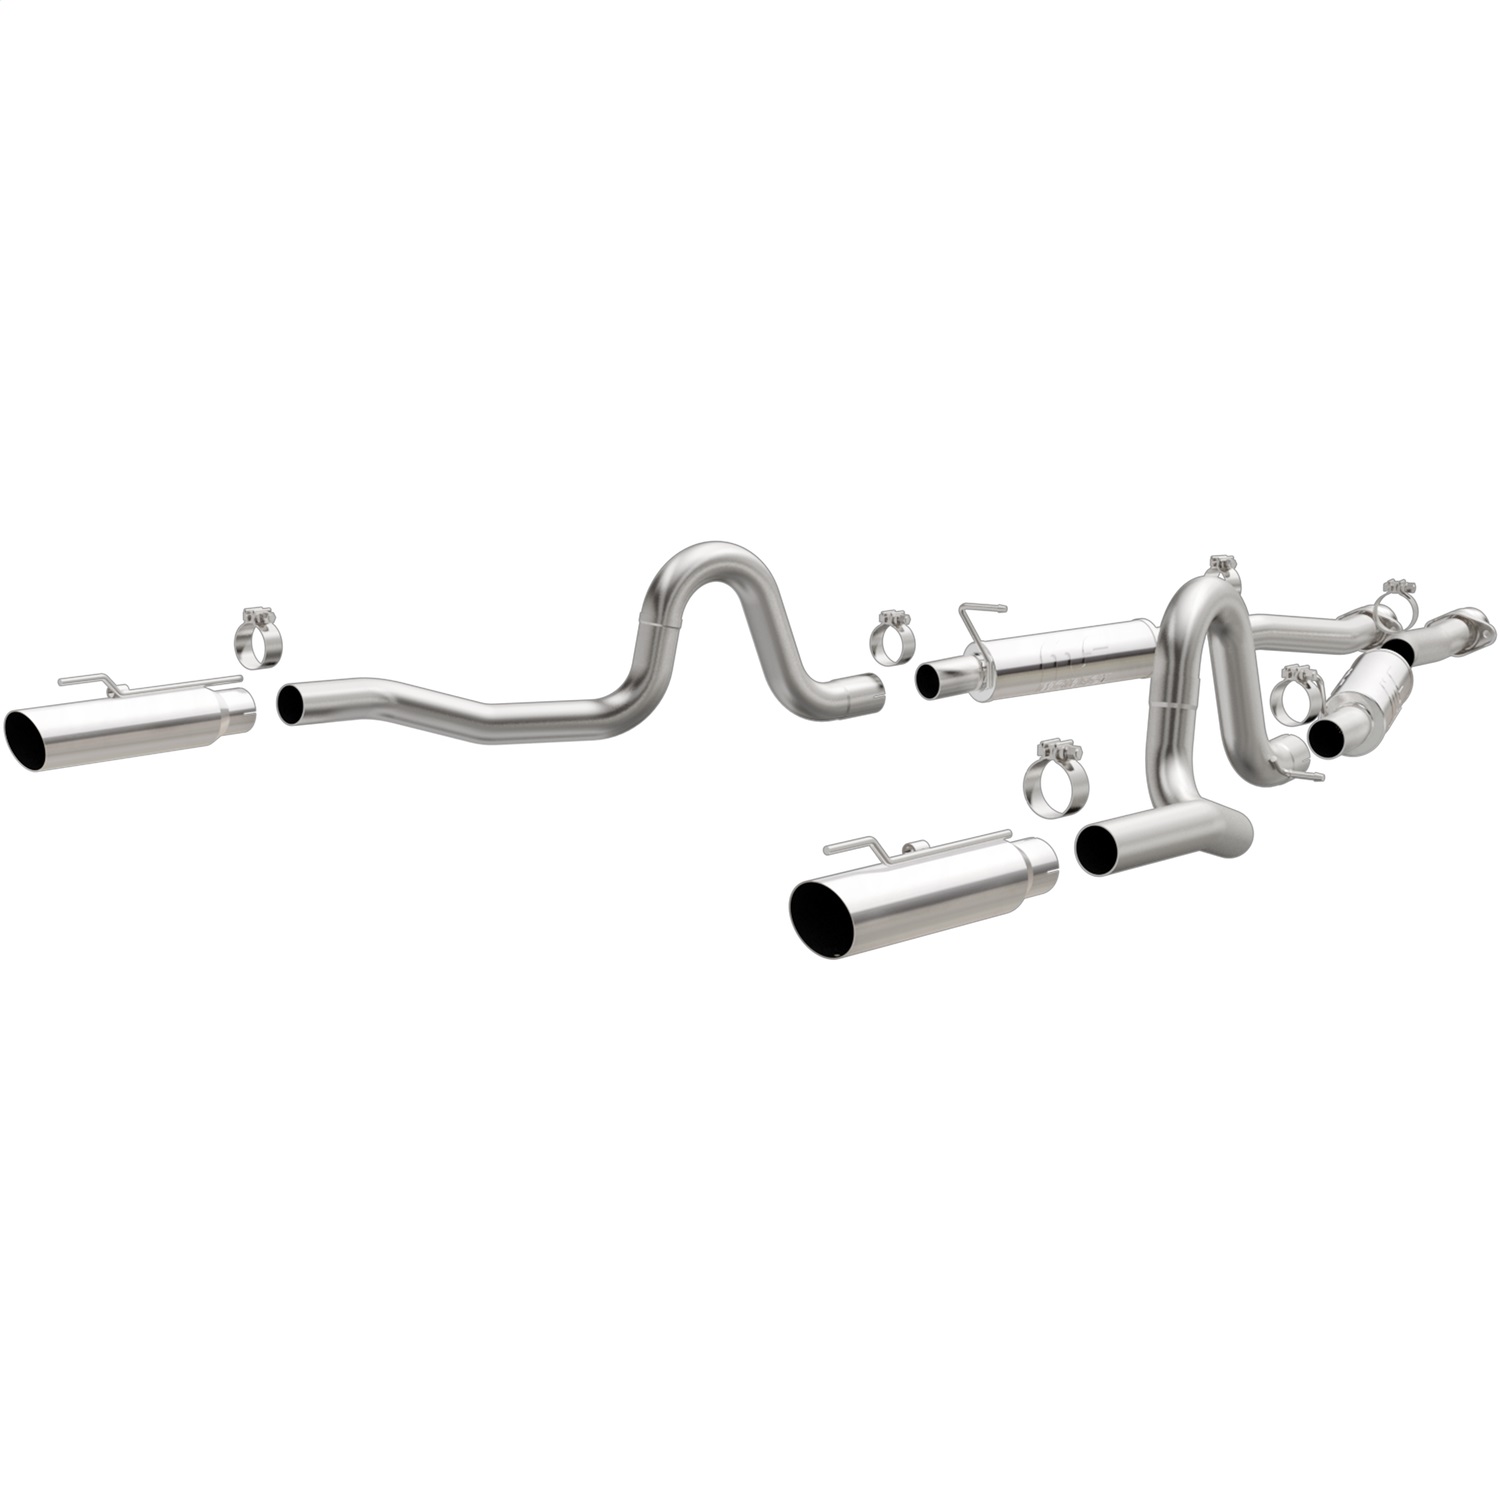 MagnaFlow Exhaust Products Magnaflow Performance Exhaust 15673 Exhaust System Kit